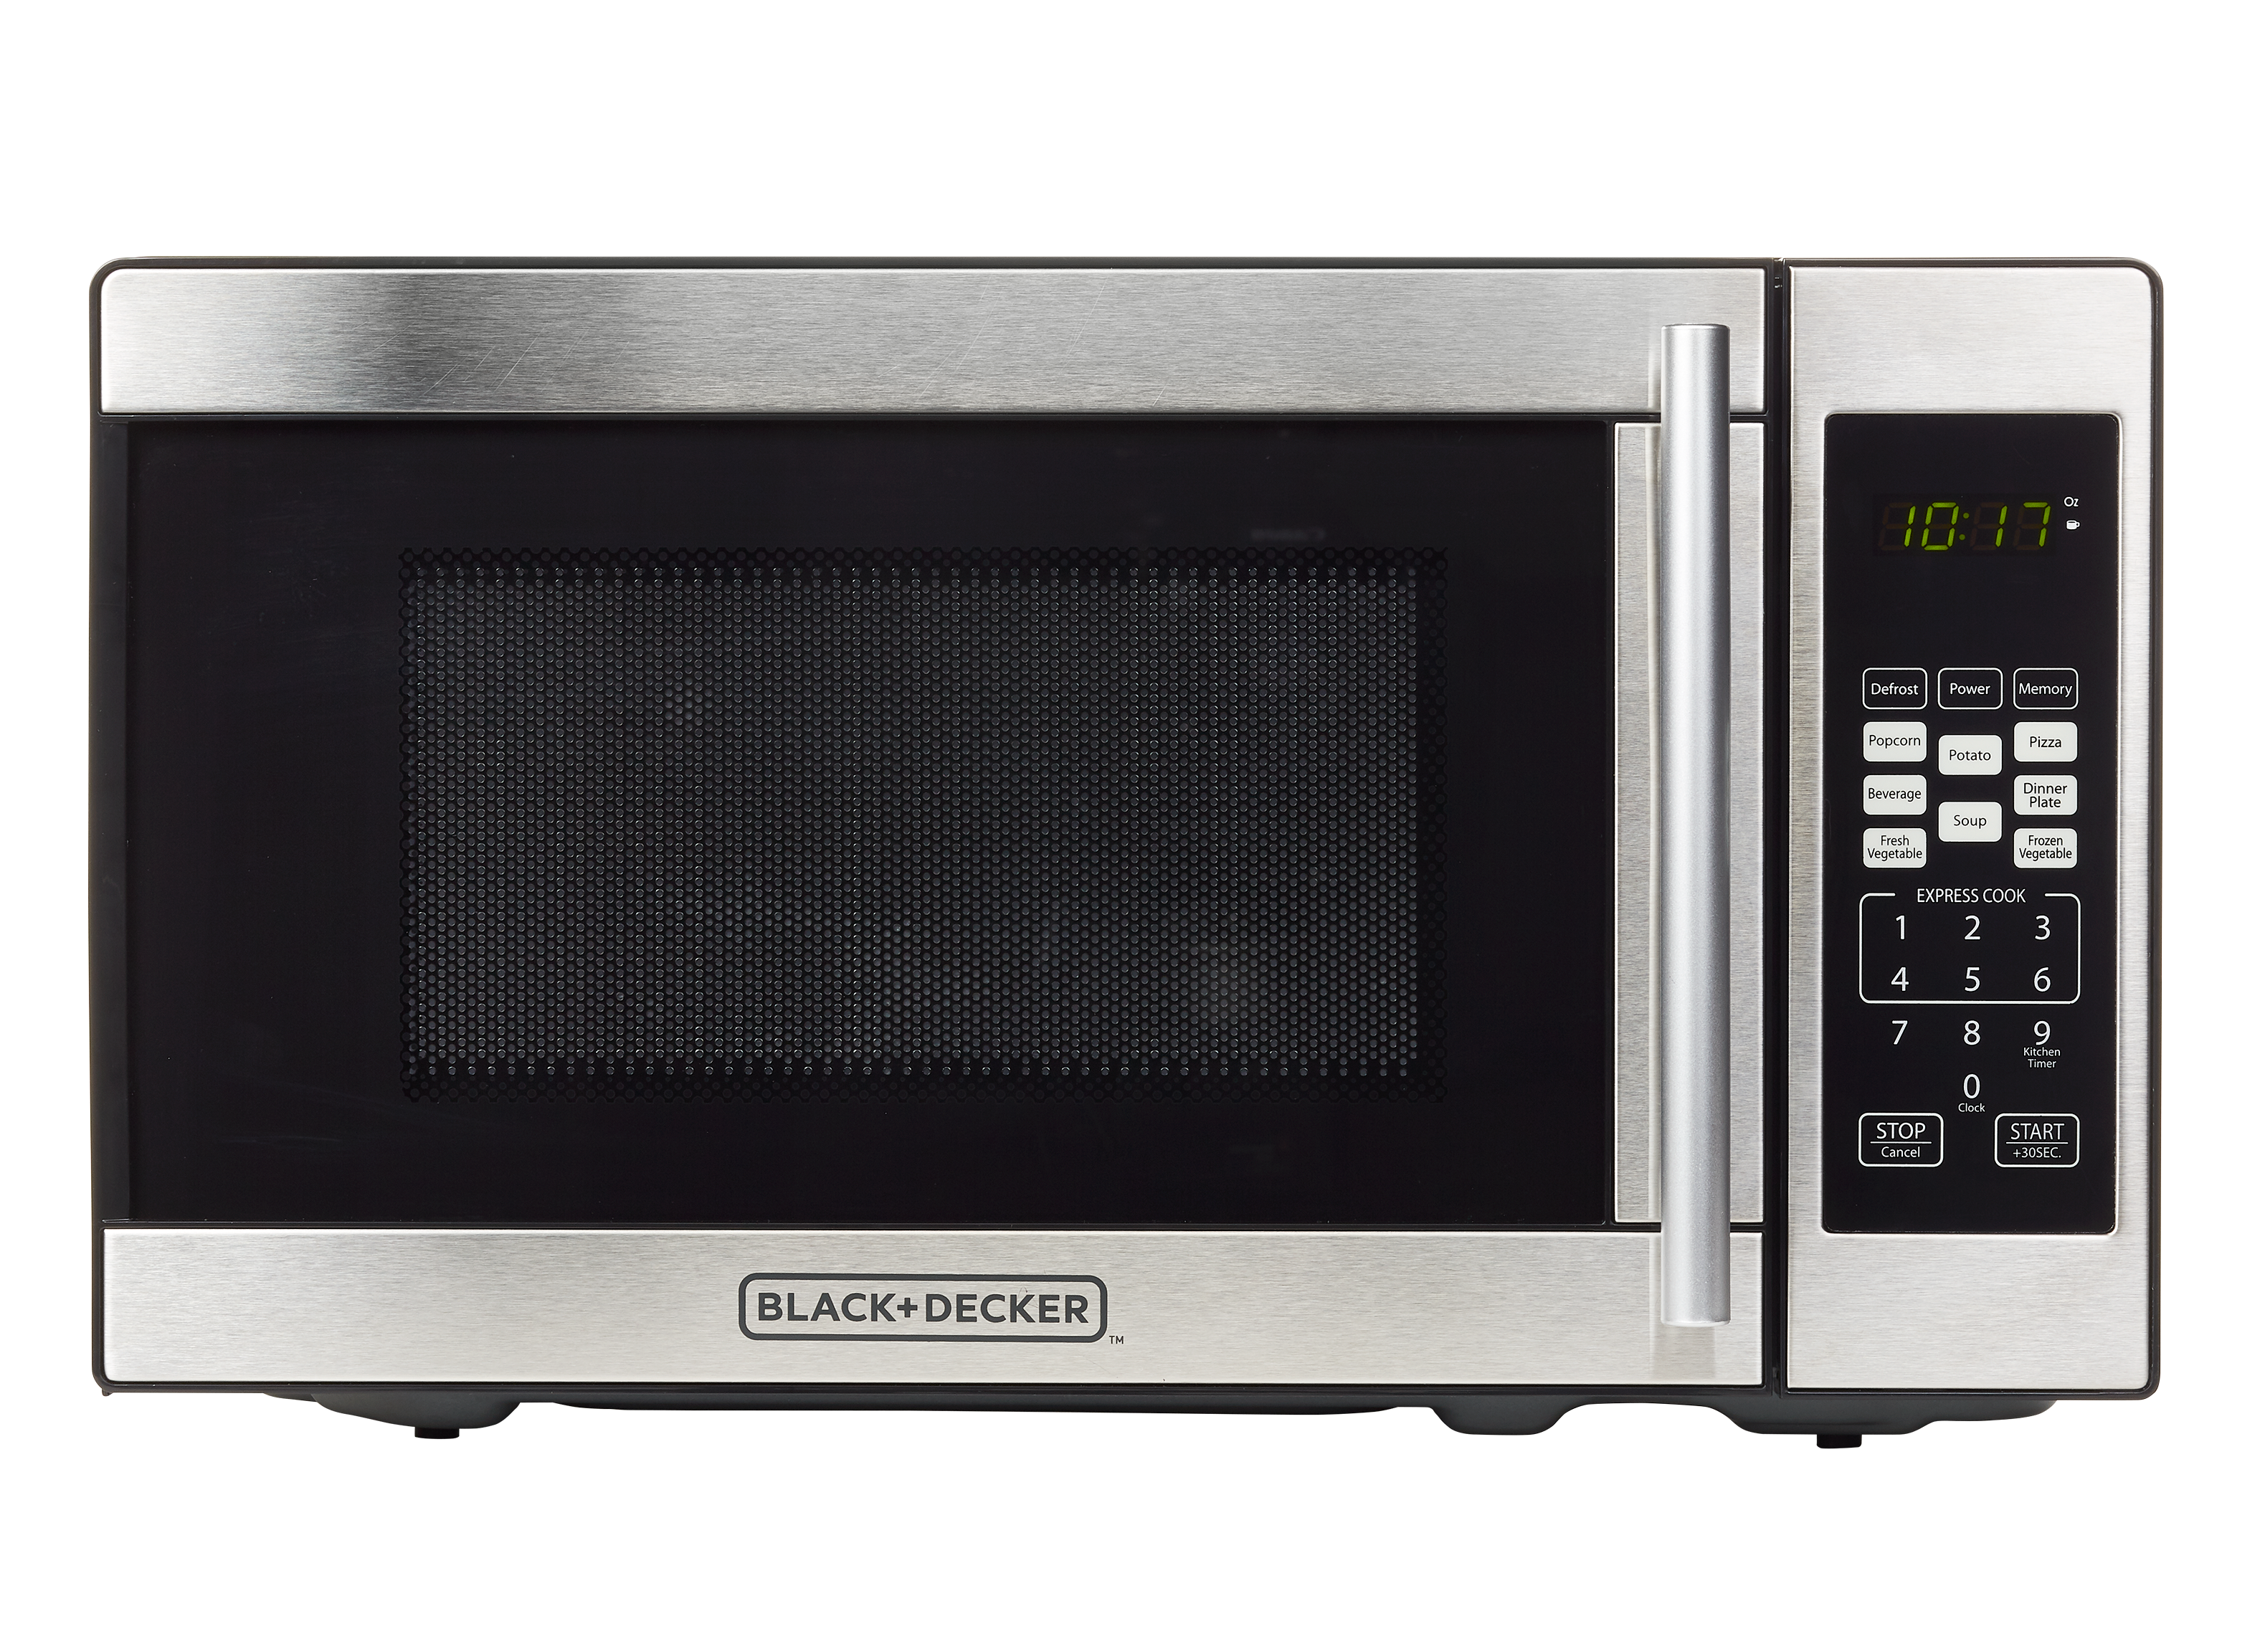 https://crdms.images.consumerreports.org/prod/products/cr/models/394813-small-countertop-microwaves-black-decker-em720cpn-p-59903.png